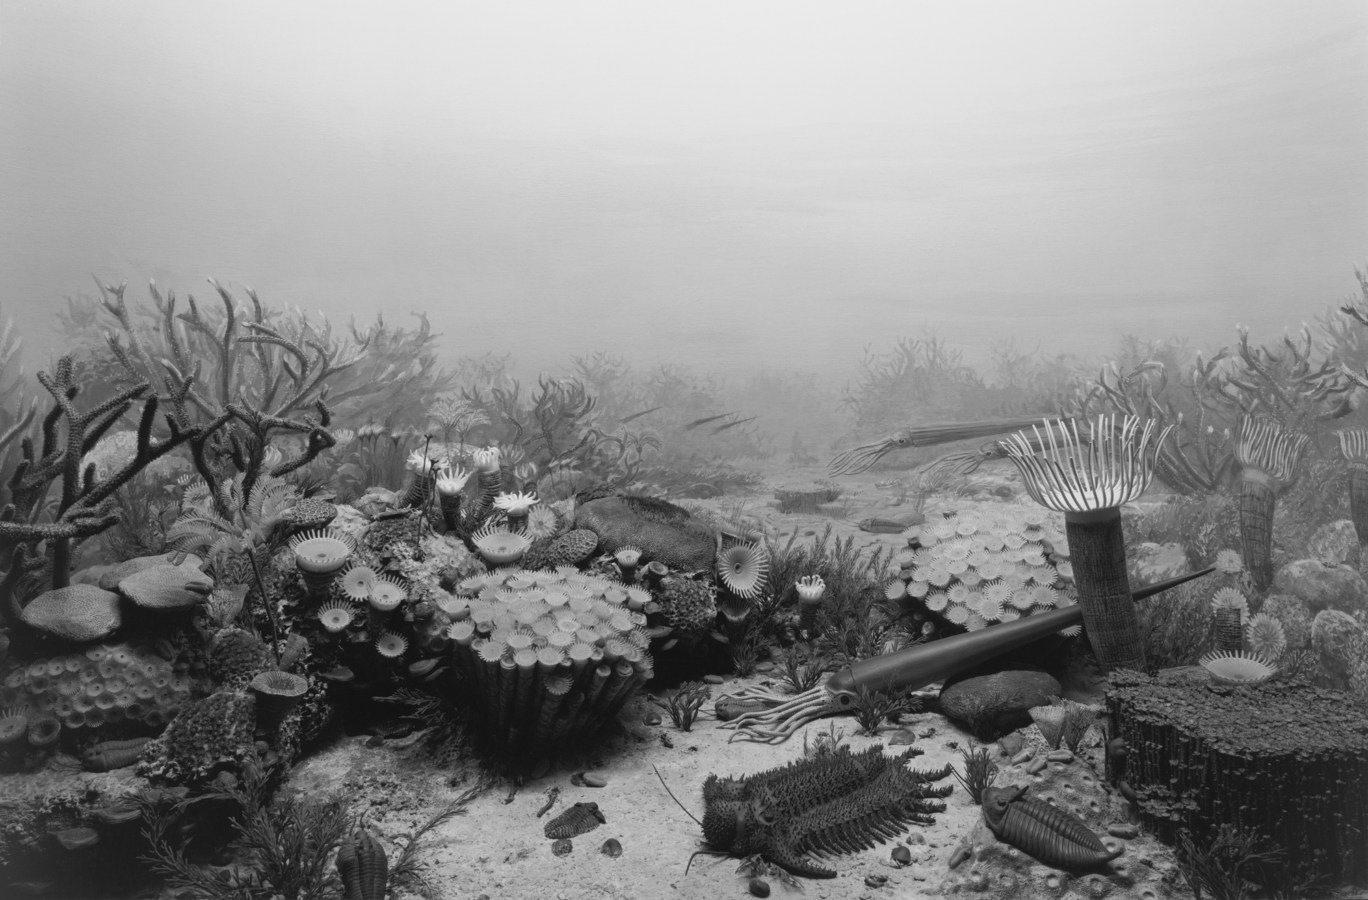 Black and white photograph of a diorama of ocean seafloor with various sea creatures